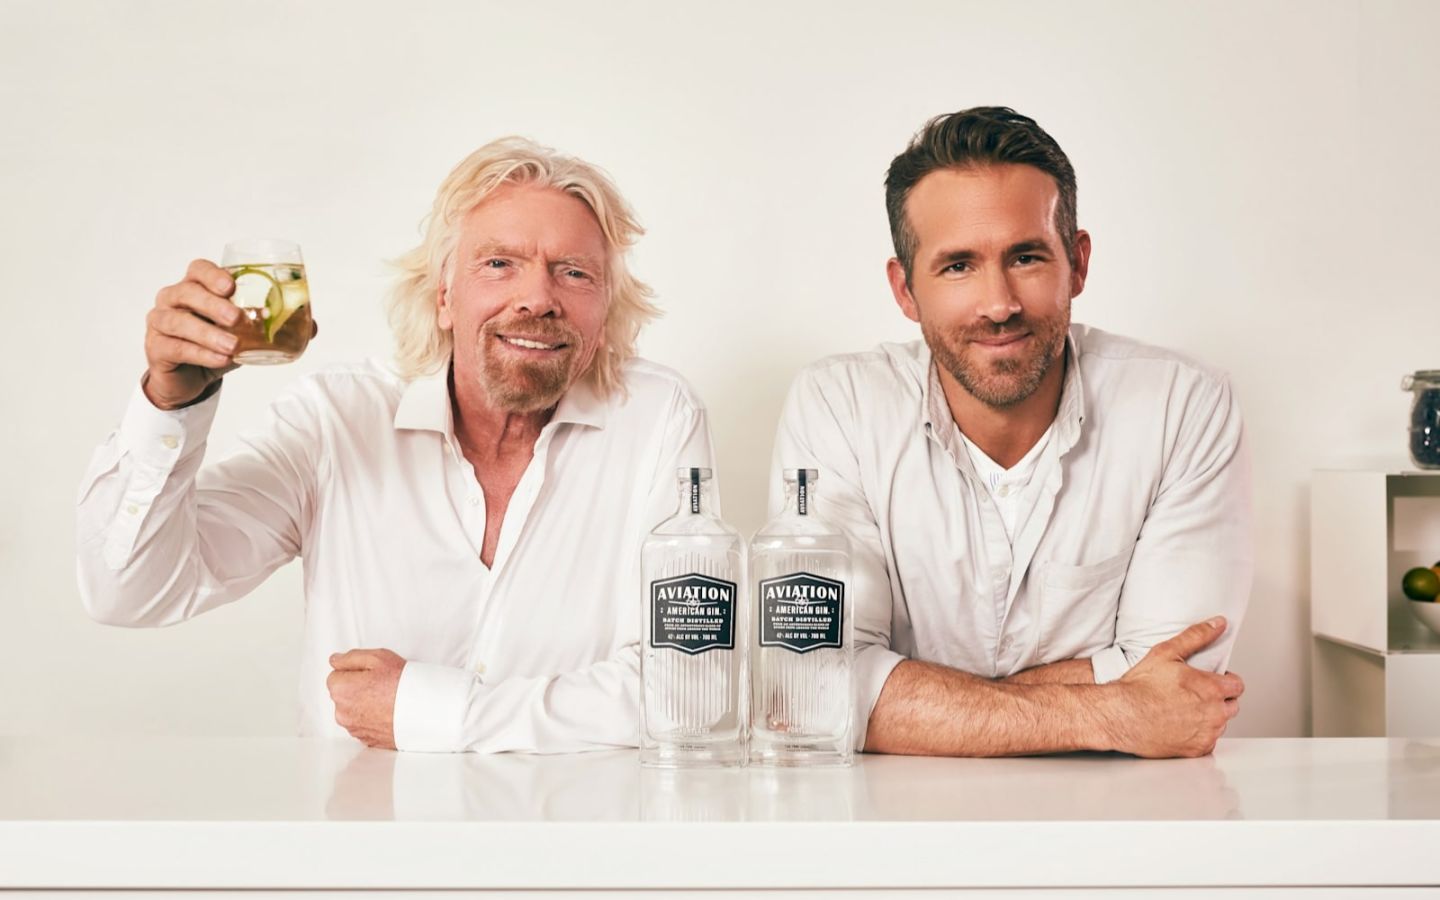 Richard Branson and Ryan Reynolds with two bottles of Aviation Gin